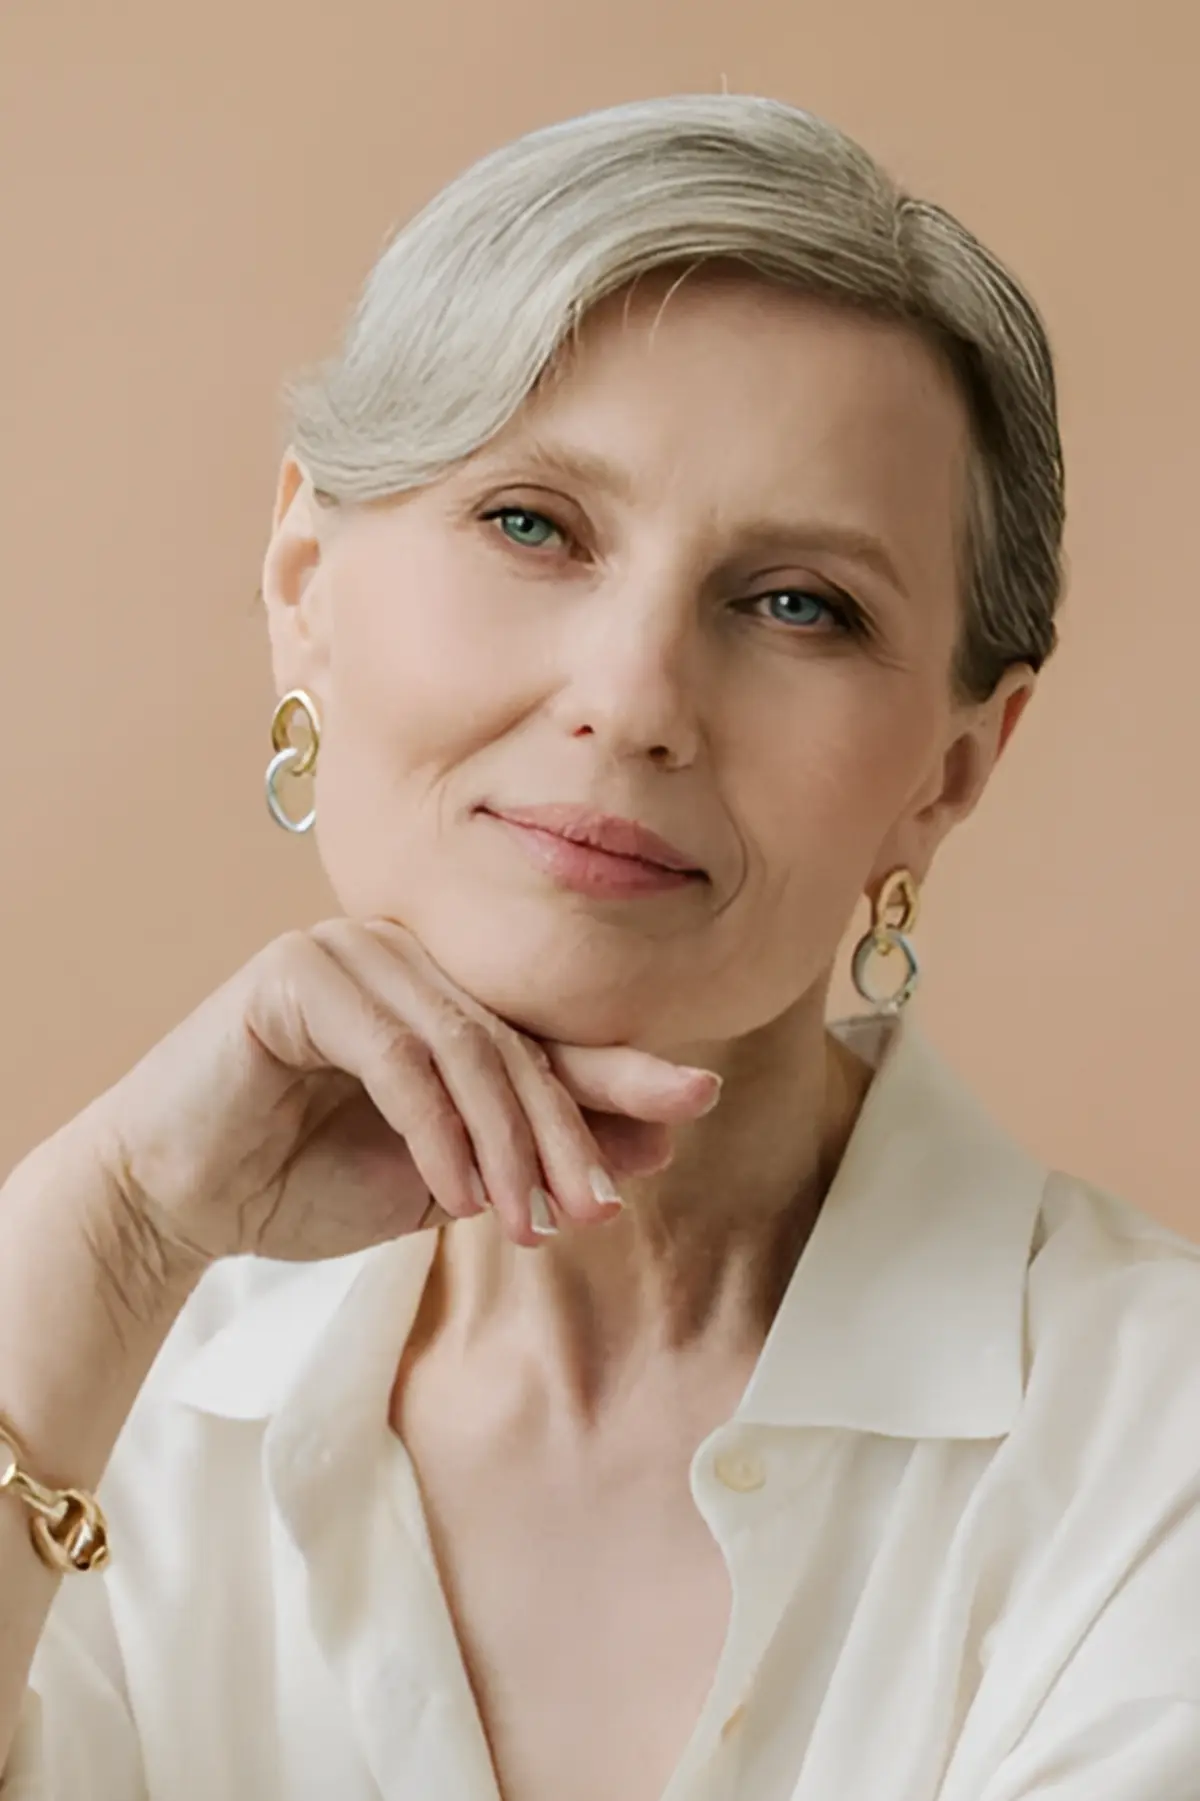 what makeup should a woman over 50 wear